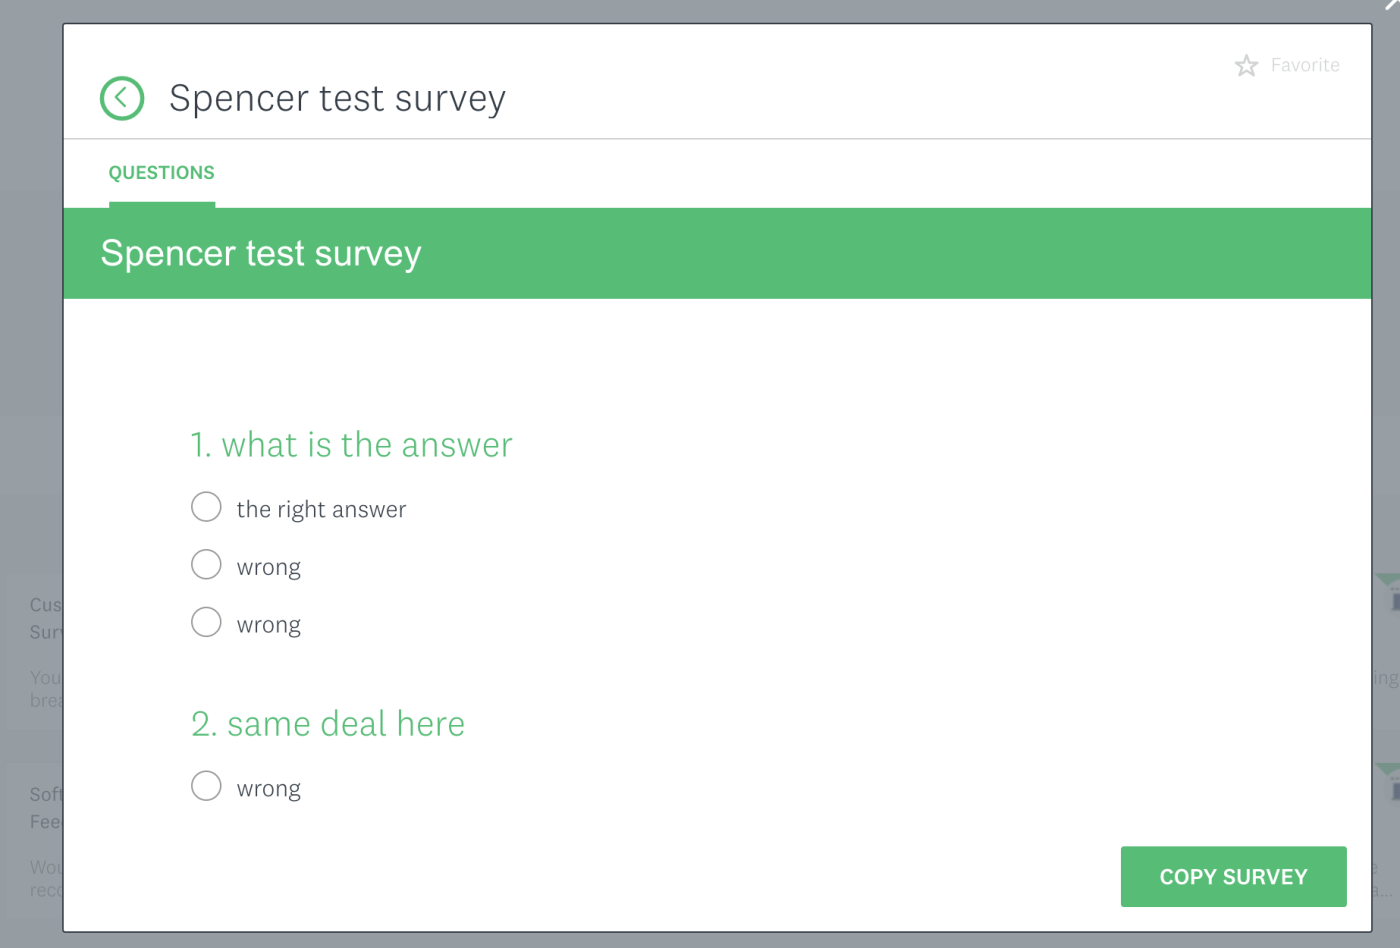 Preview of the survey you want to make a copy of